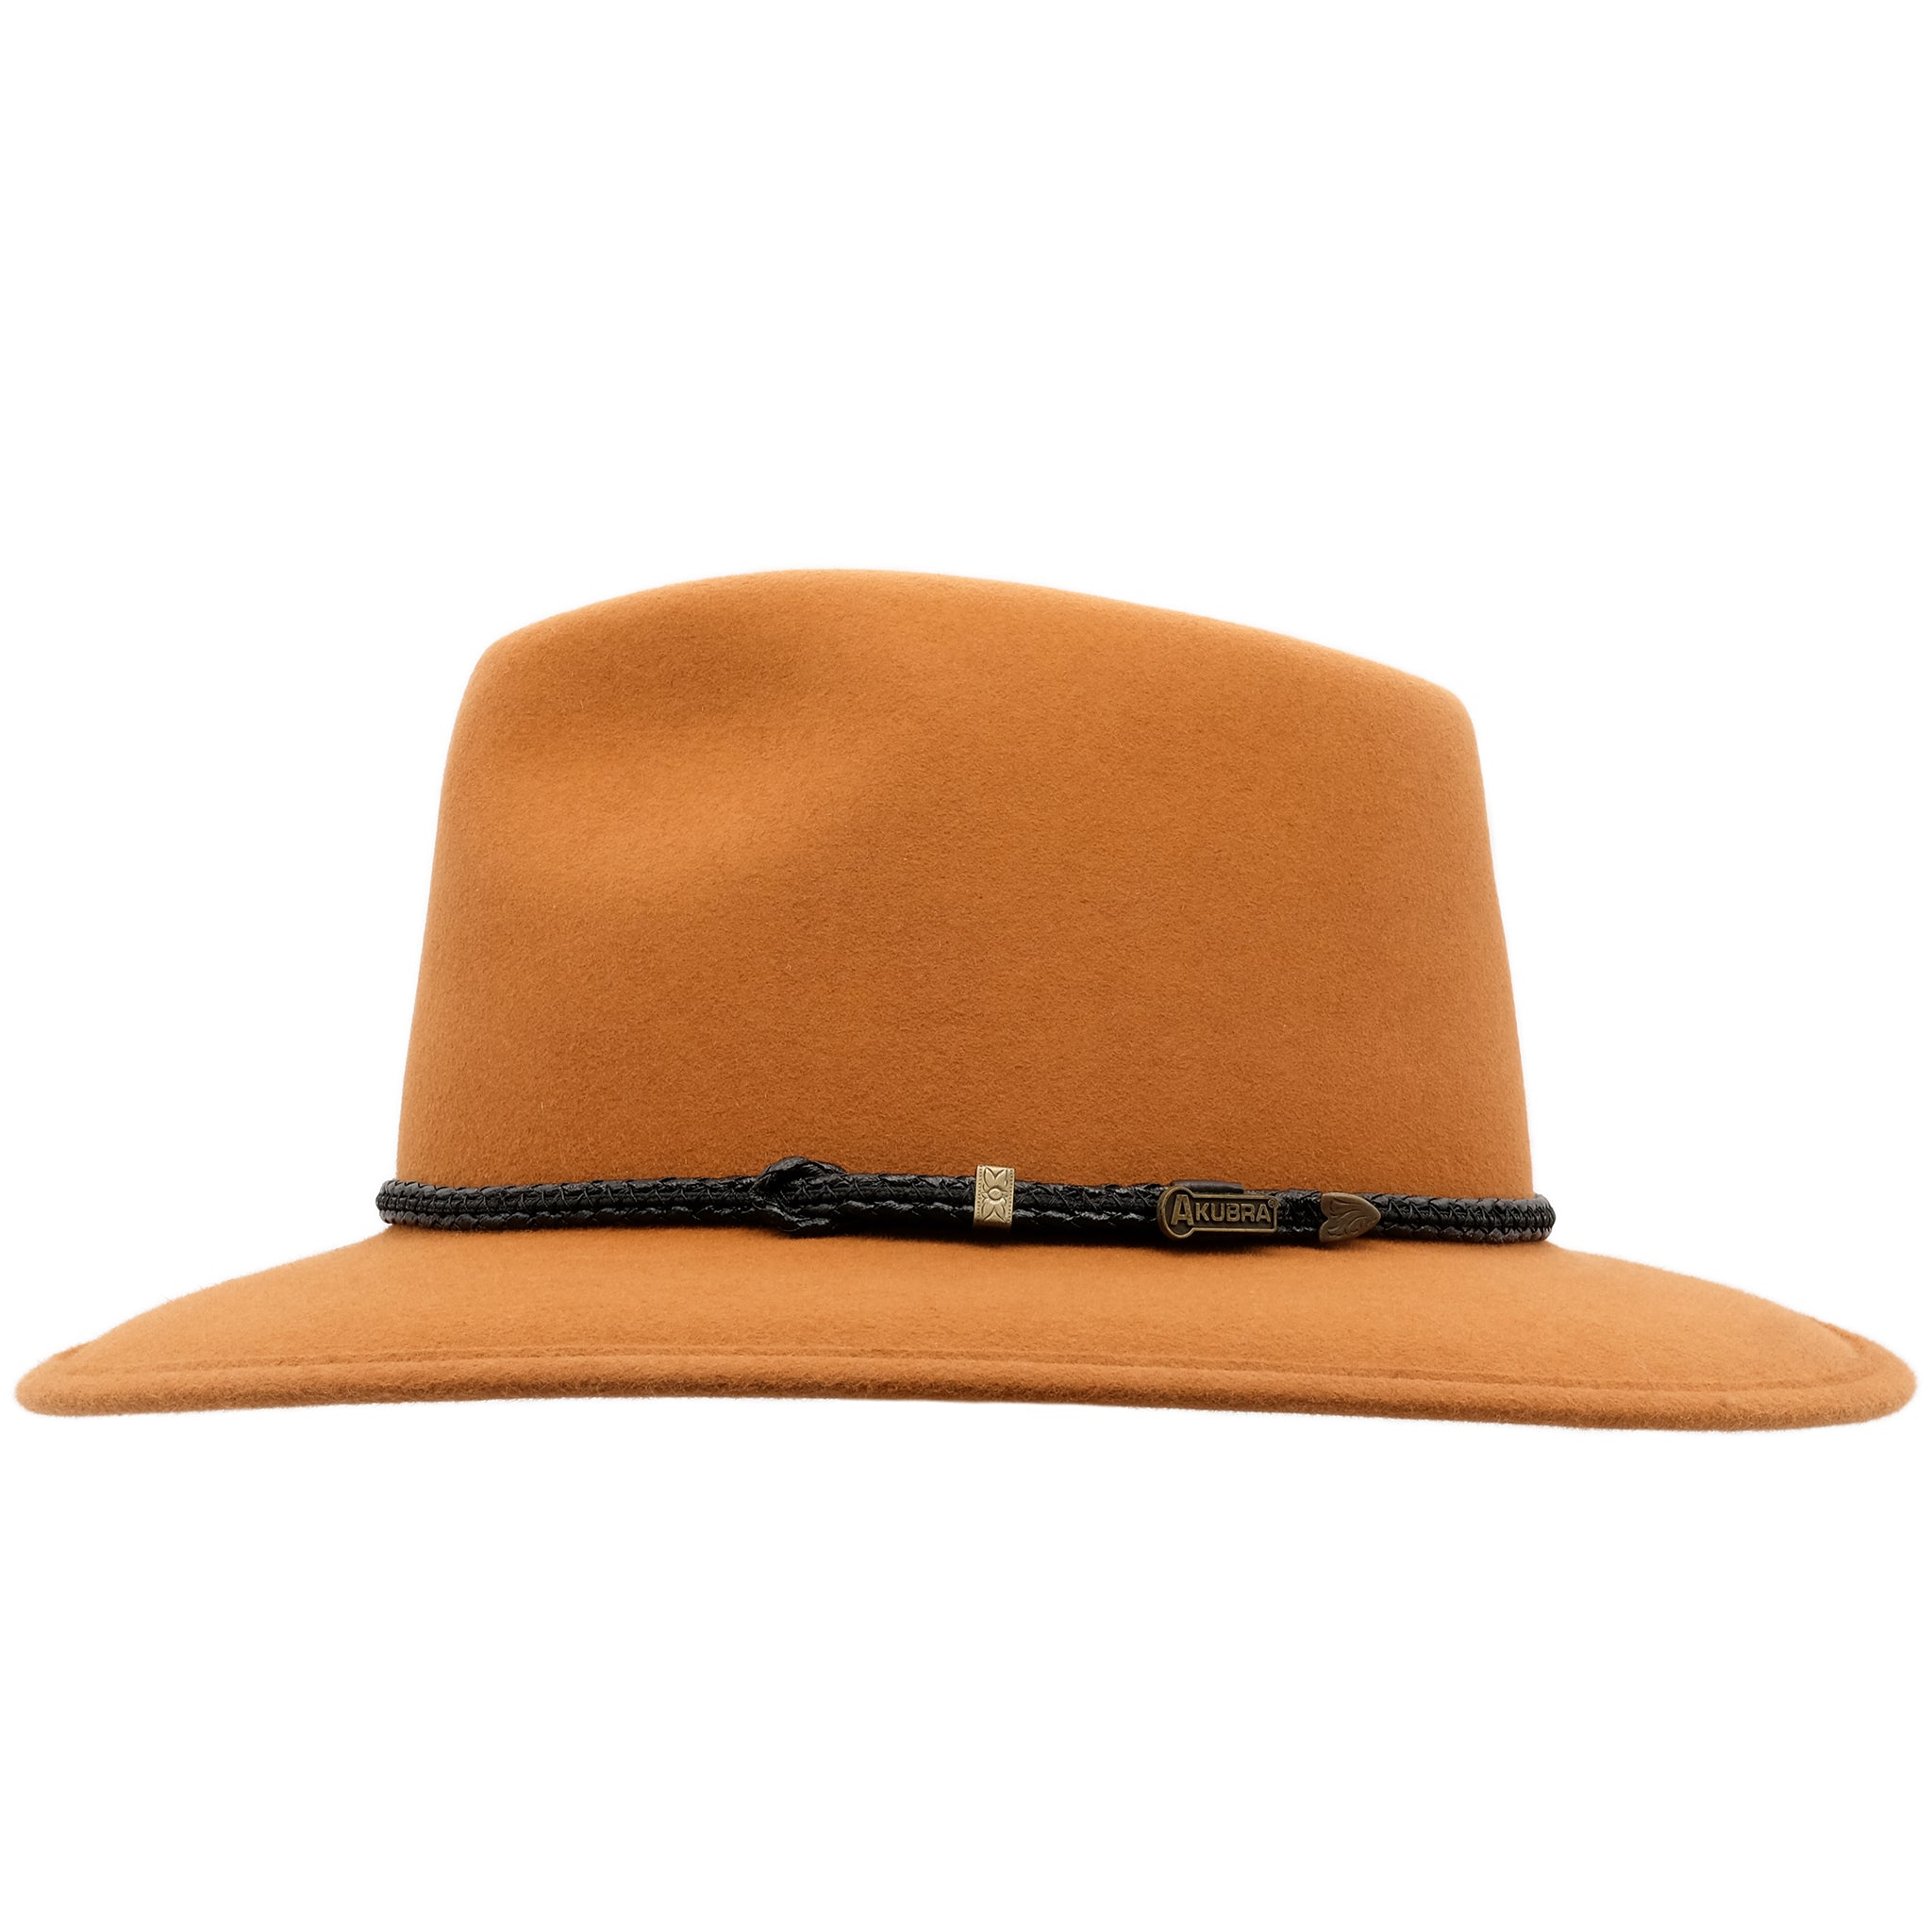 Side view of the rust coloured Akubra Traveller hat